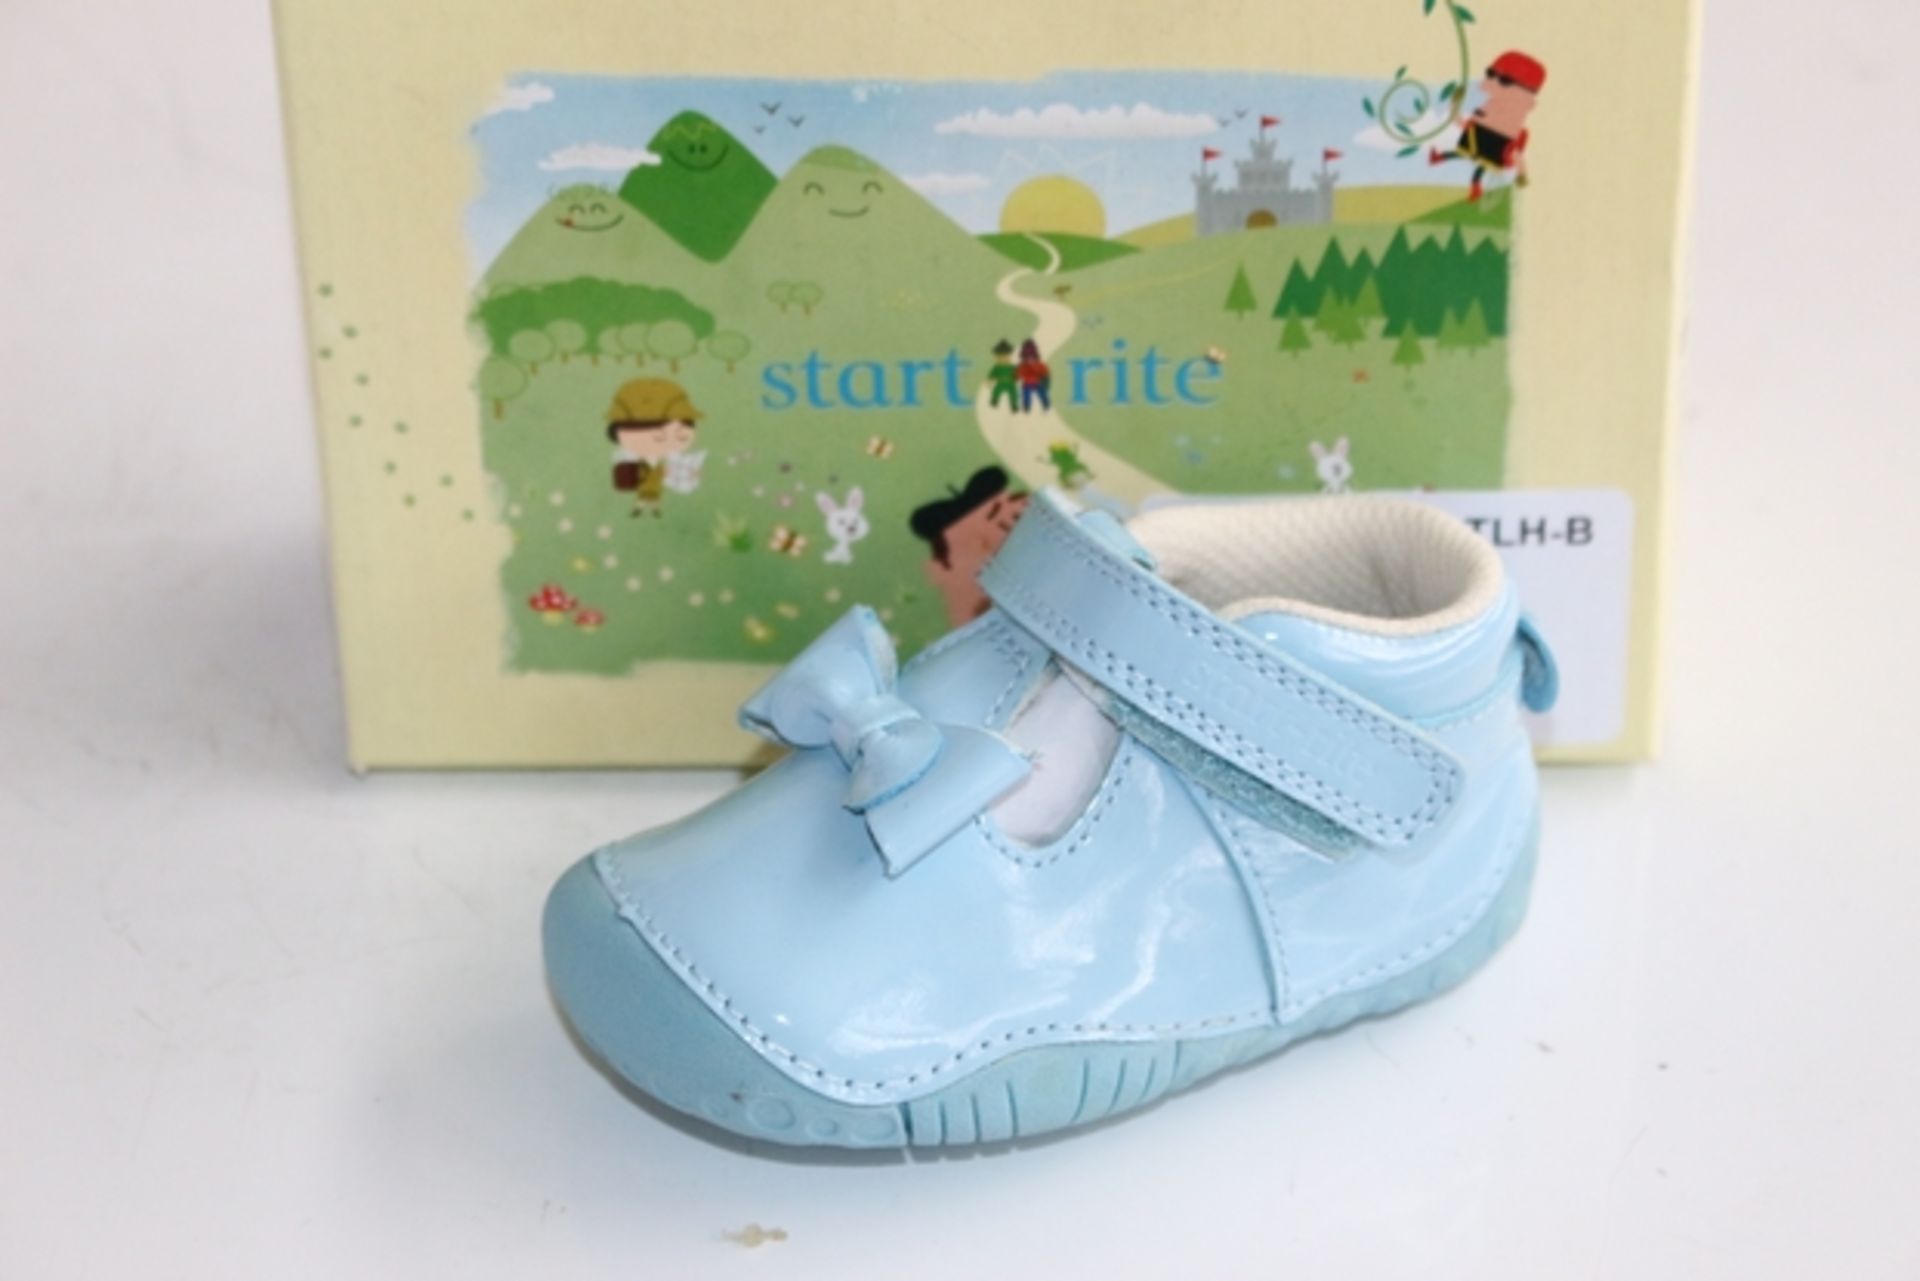 1X BOXED UNUSED PAIR OF START RIGHT CHILDREN'S SHOES SIZE 3G RRP £30 (DS-TLH-B) (36.115)